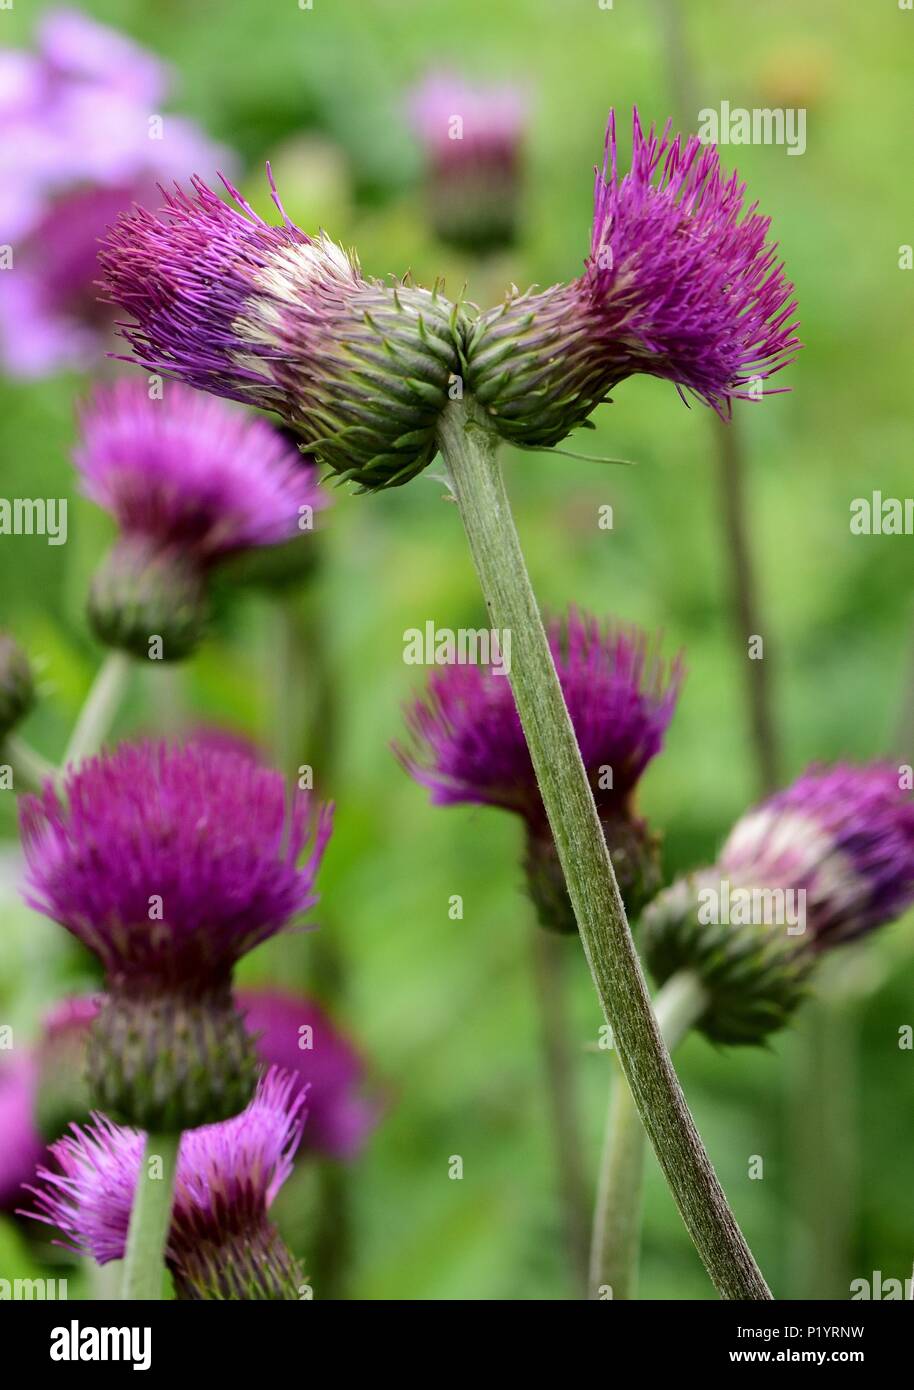 A clump of ornamental thistles in flower Stock Photo